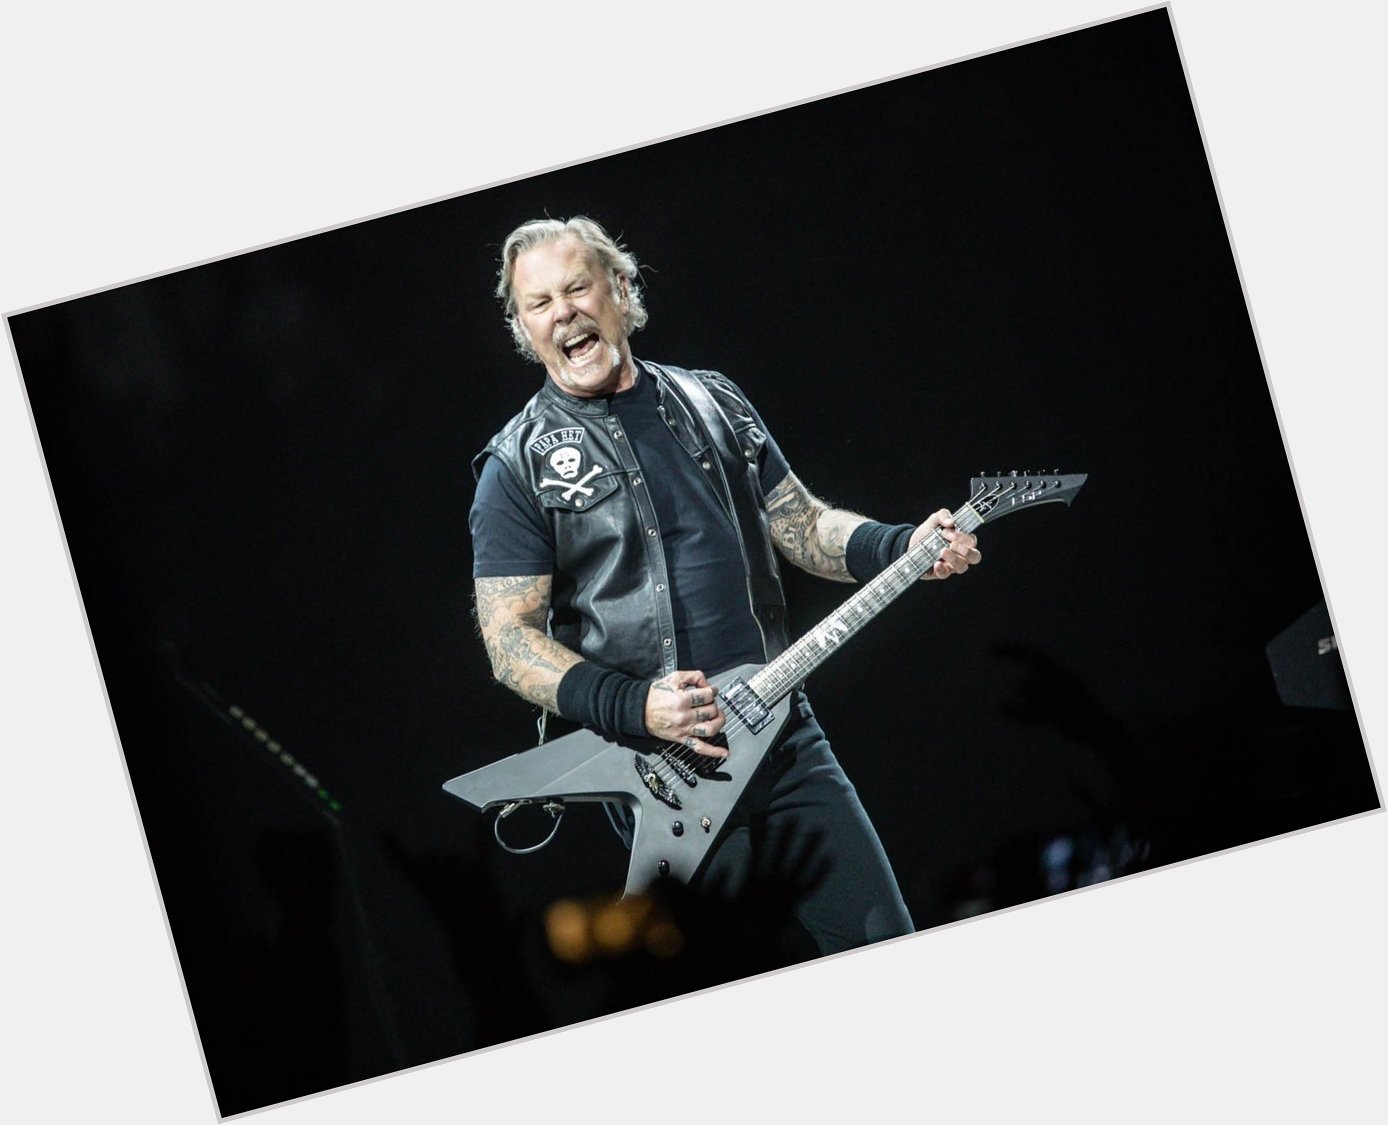 Happy birthday to the one and only Mr. James Hetfield! You fkn rule, 